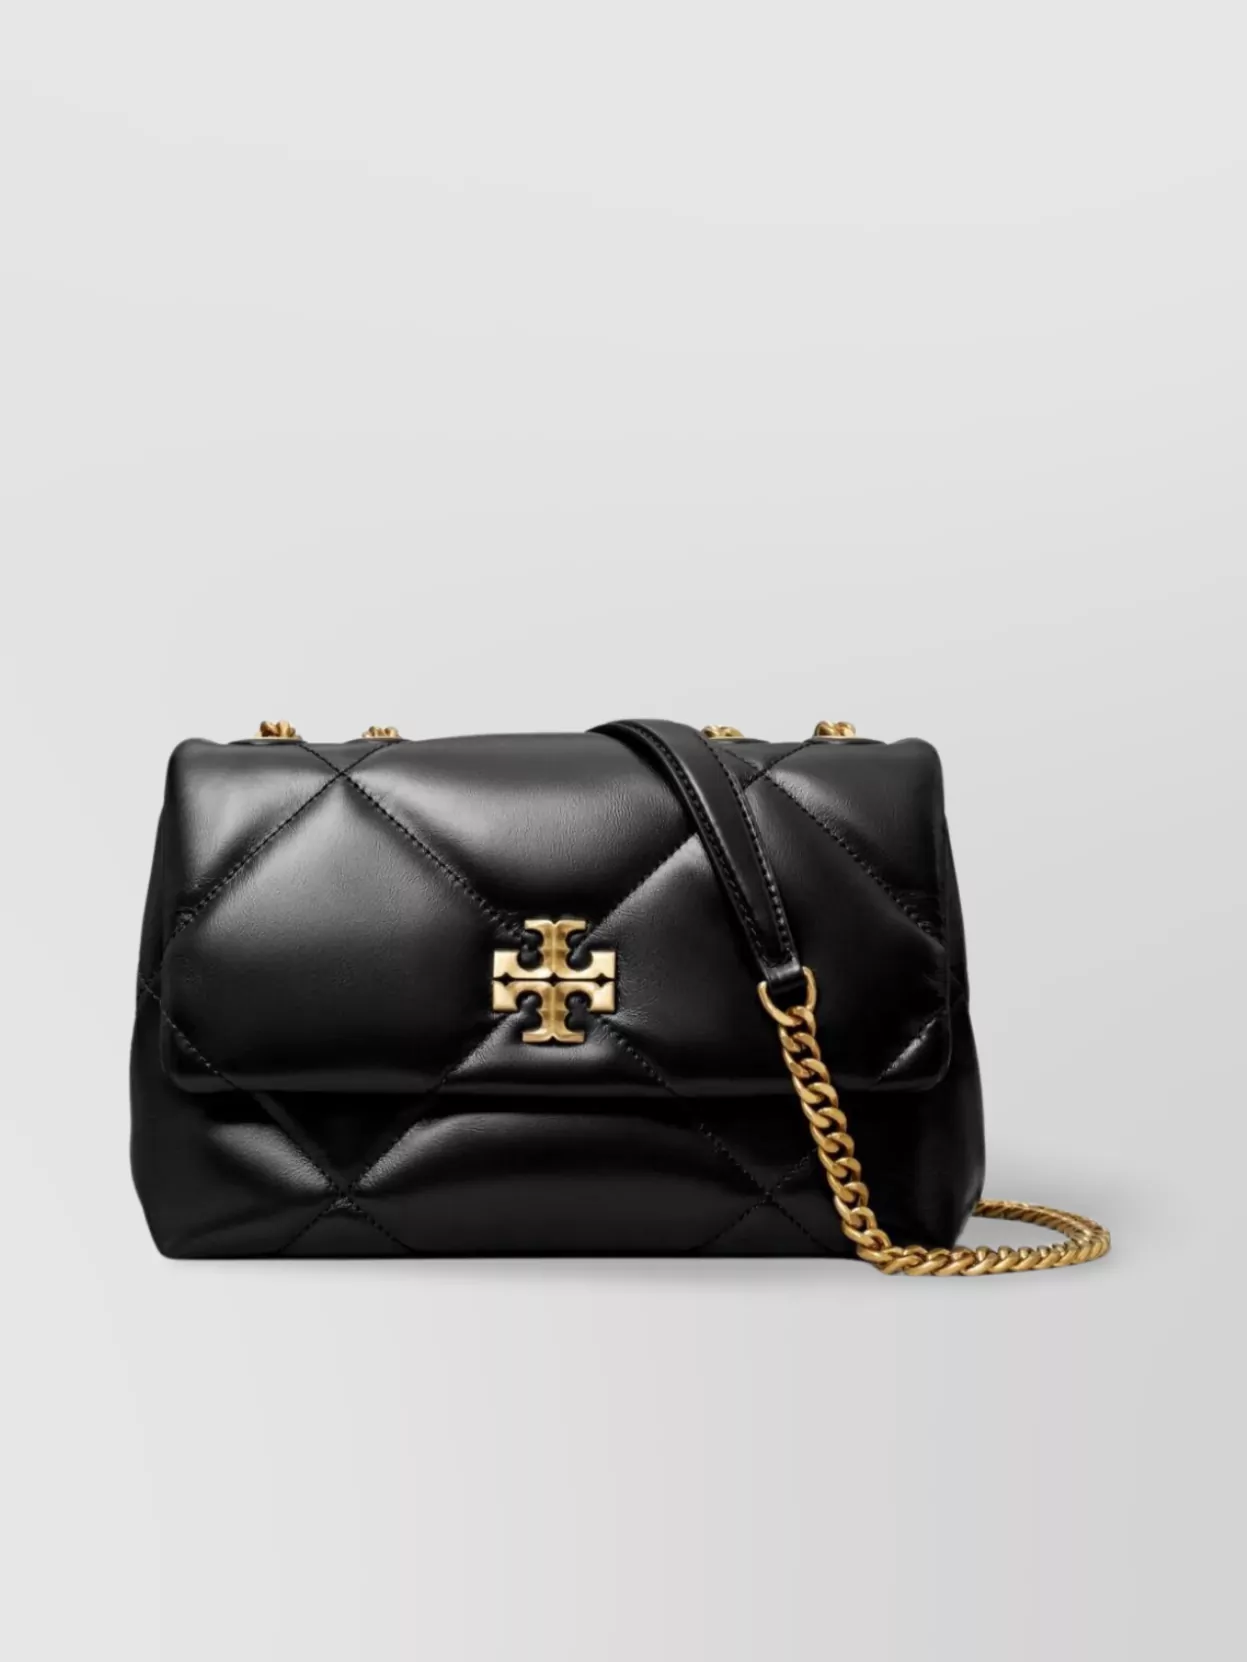 Tory Burch Quilted Diamond Shoulder Bag